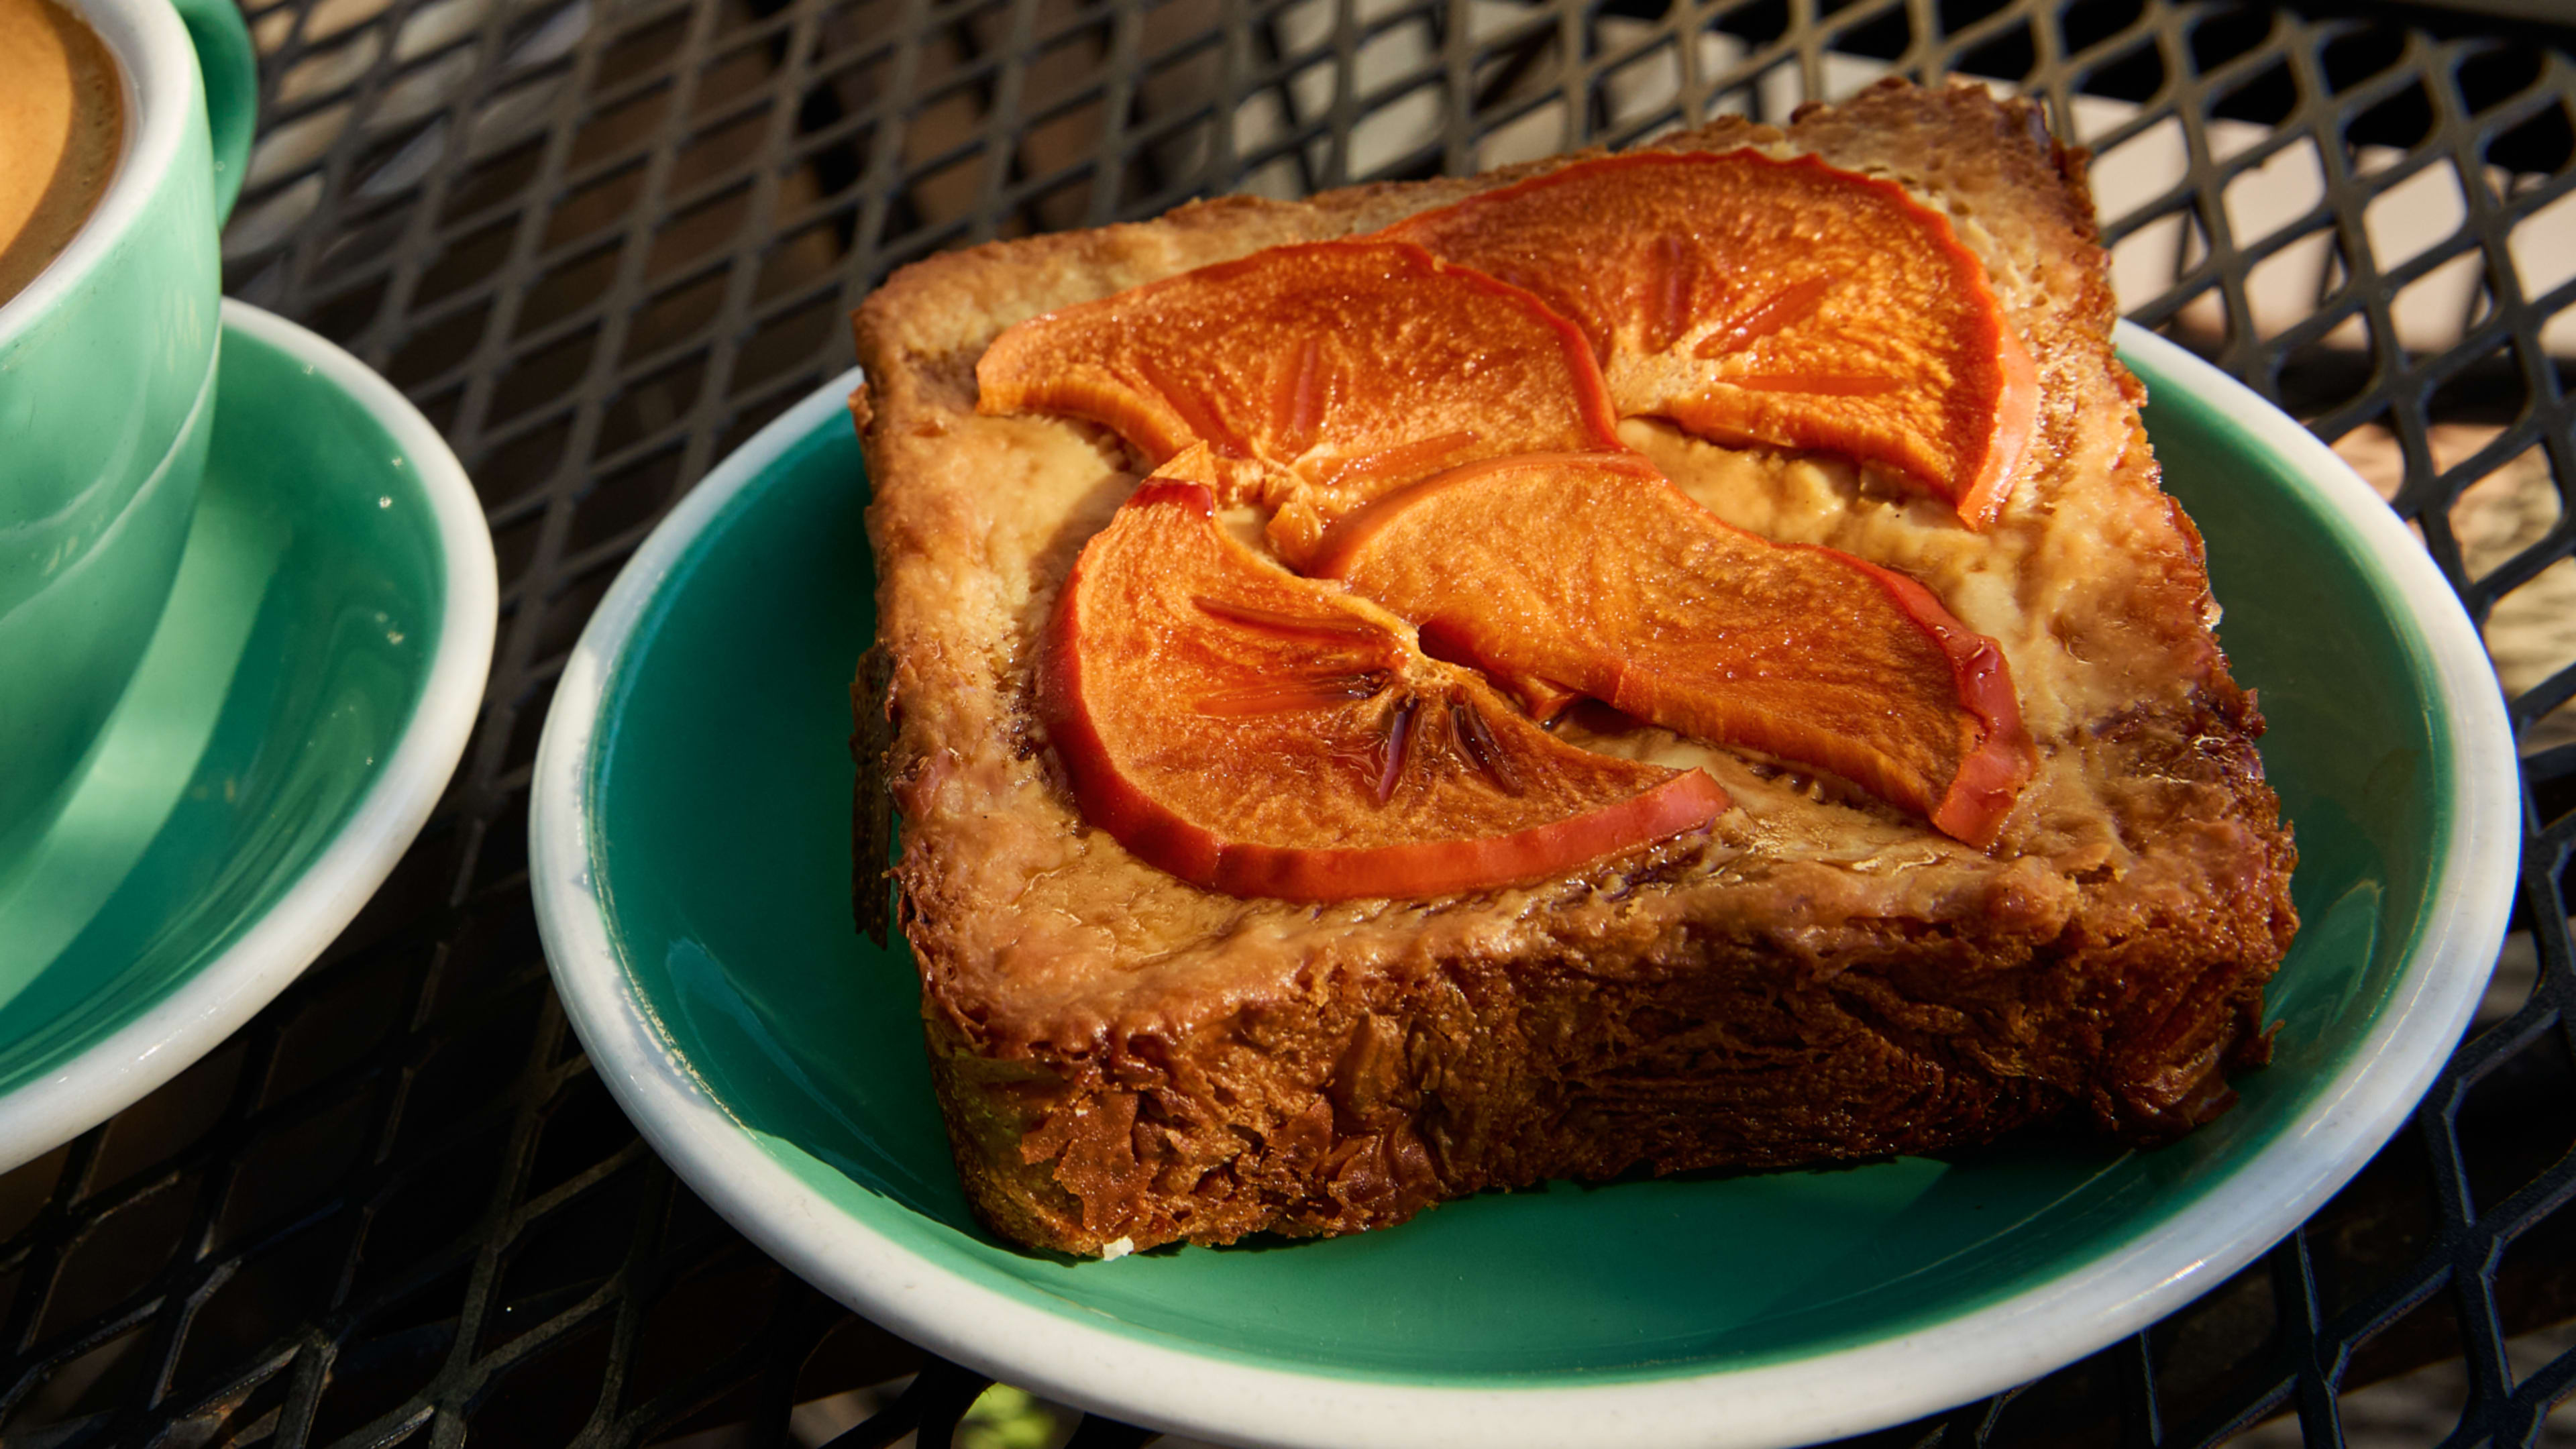 The persimmon toast at Mission Blue.